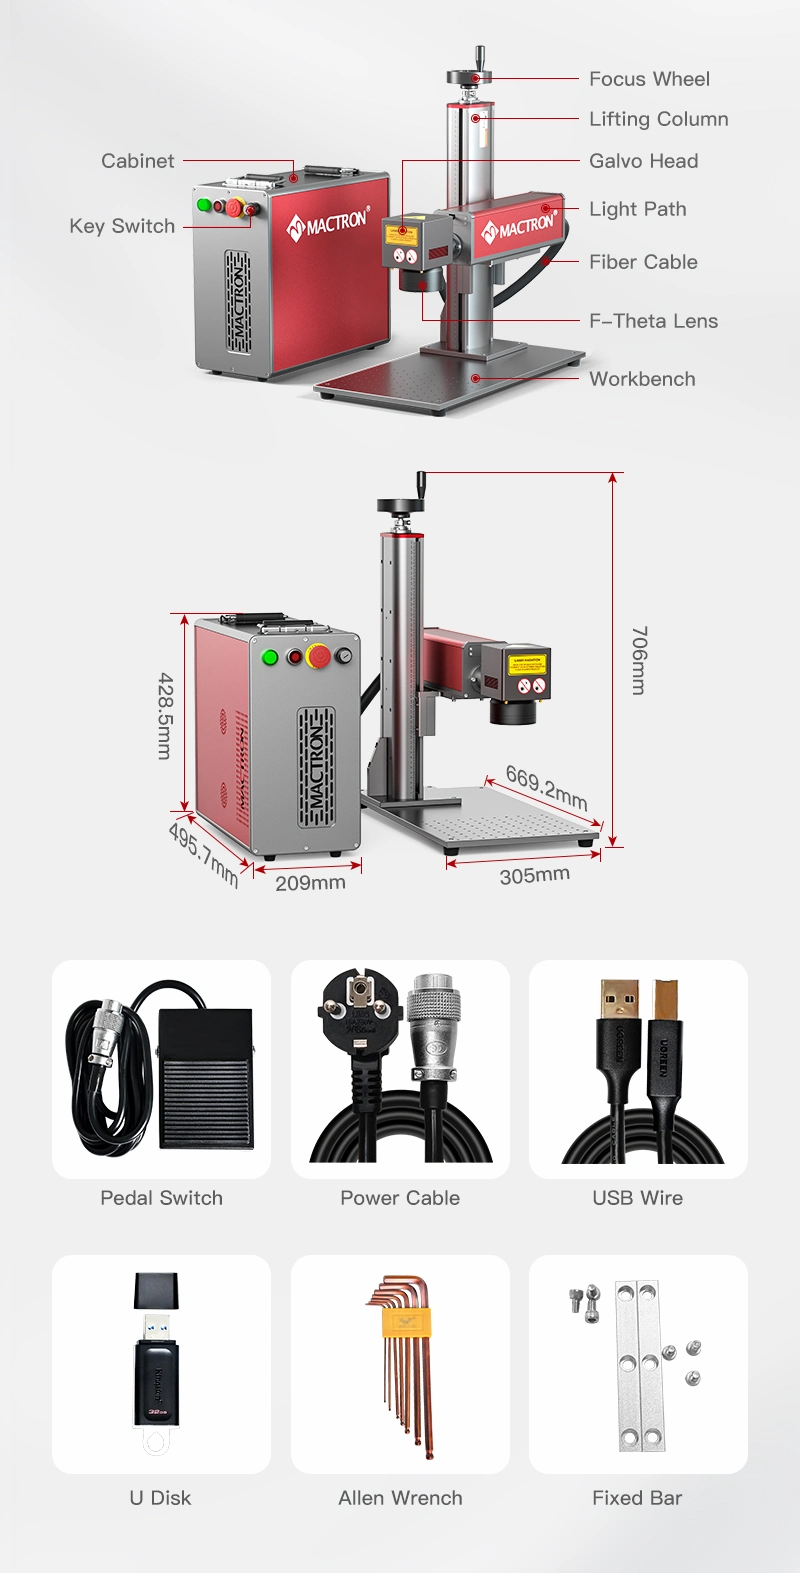 Mactron Raycus Jpt Metal Plastic Jewelry Gold Portable Fiber Laser Marking Machine for Sale